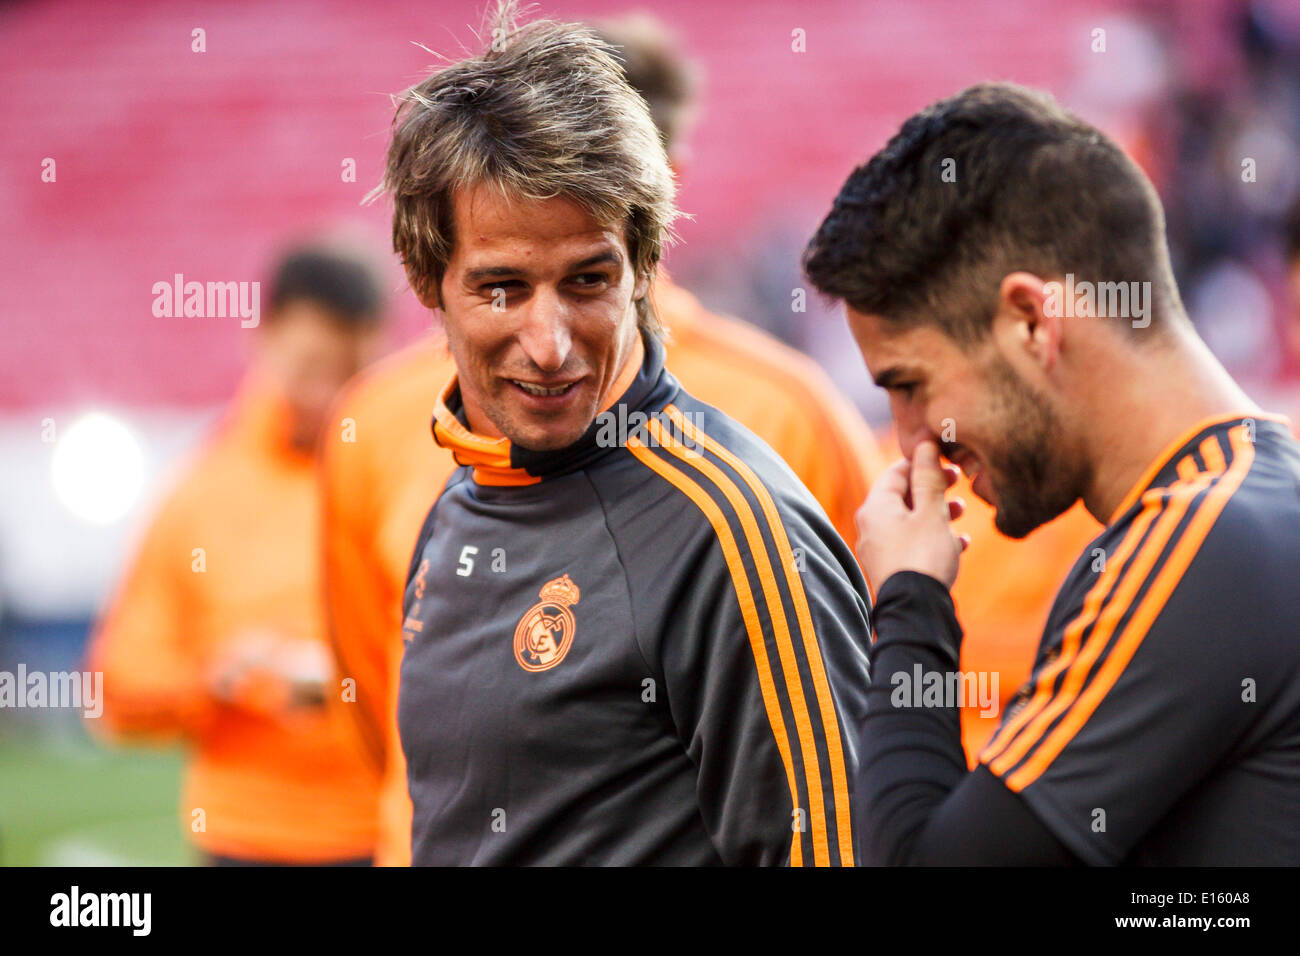 Lisbon, Portugal. 23rd May, 2014. Real Madrid defender Fábio Coentrão (5), center, during the Real Madrid open training session at Luz Stadium in Lisbon, Portugal. Real Madrid and Atlético de Madrid disputes the UEFA Champions League final on Saturday, May 24, 2014. Credit:  Leonardo Mota/Alamy Live News Stock Photo